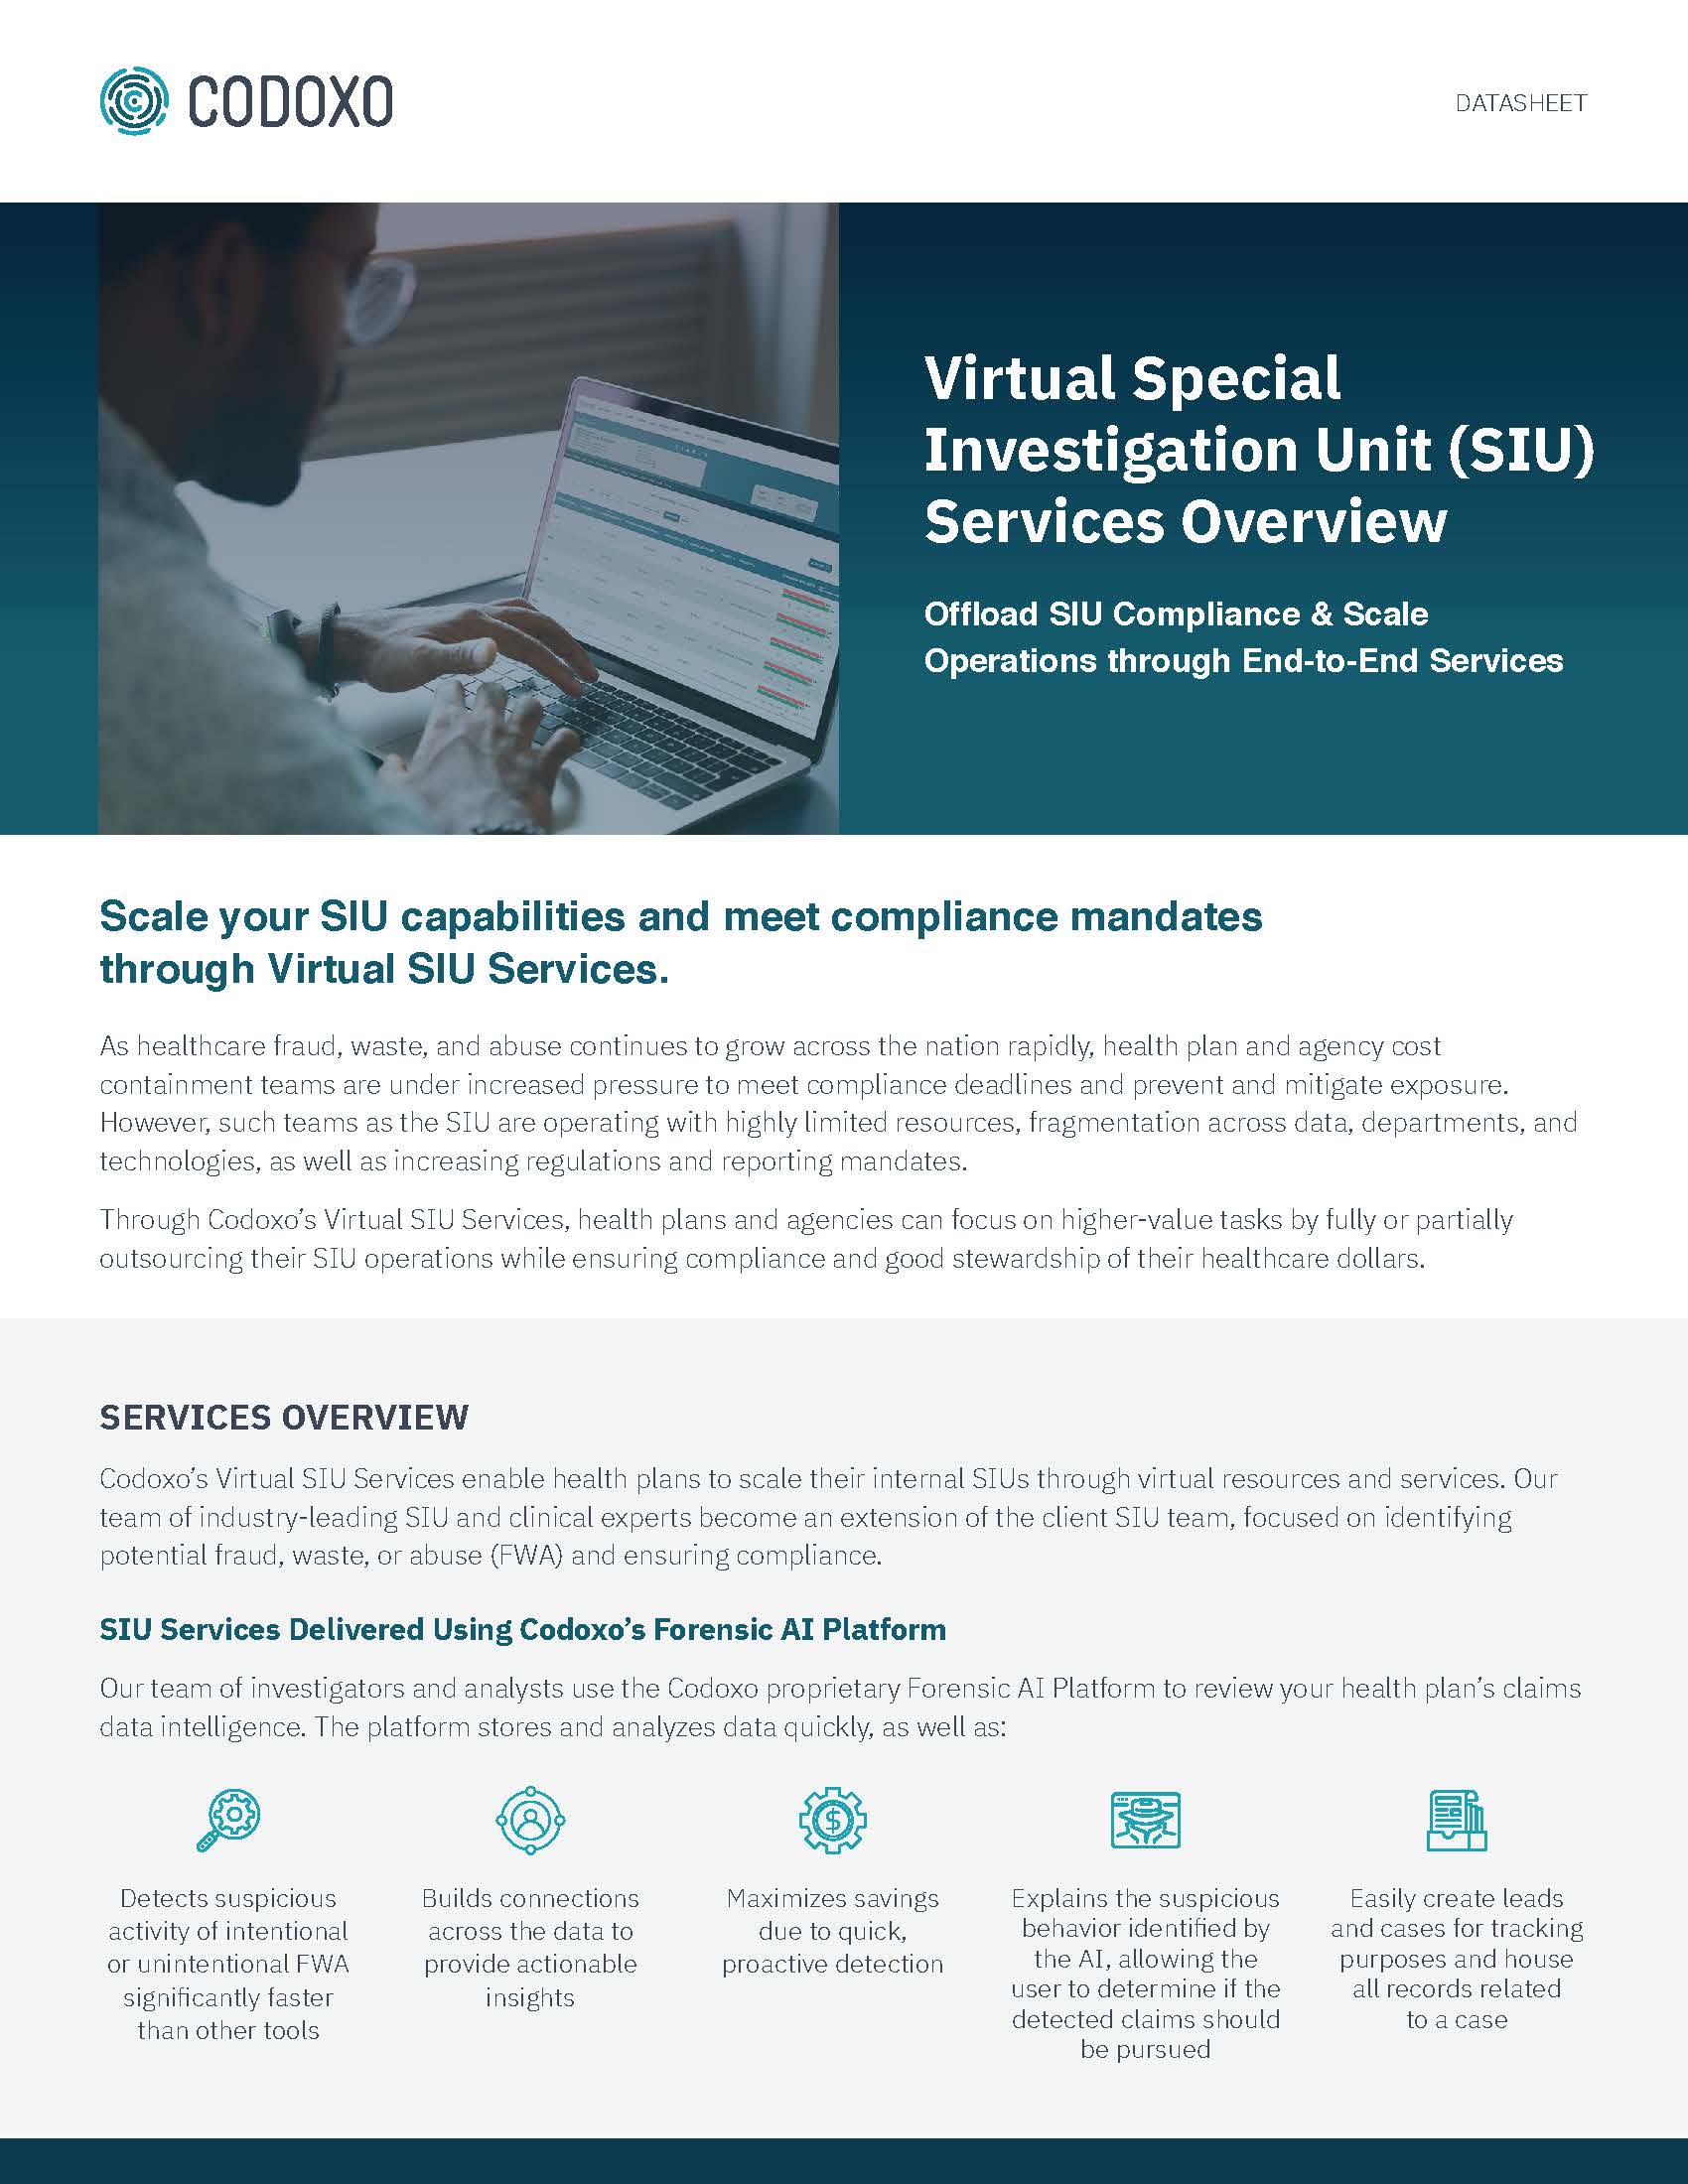 Virtual Special Investigation Unit (SIU) Services Overview